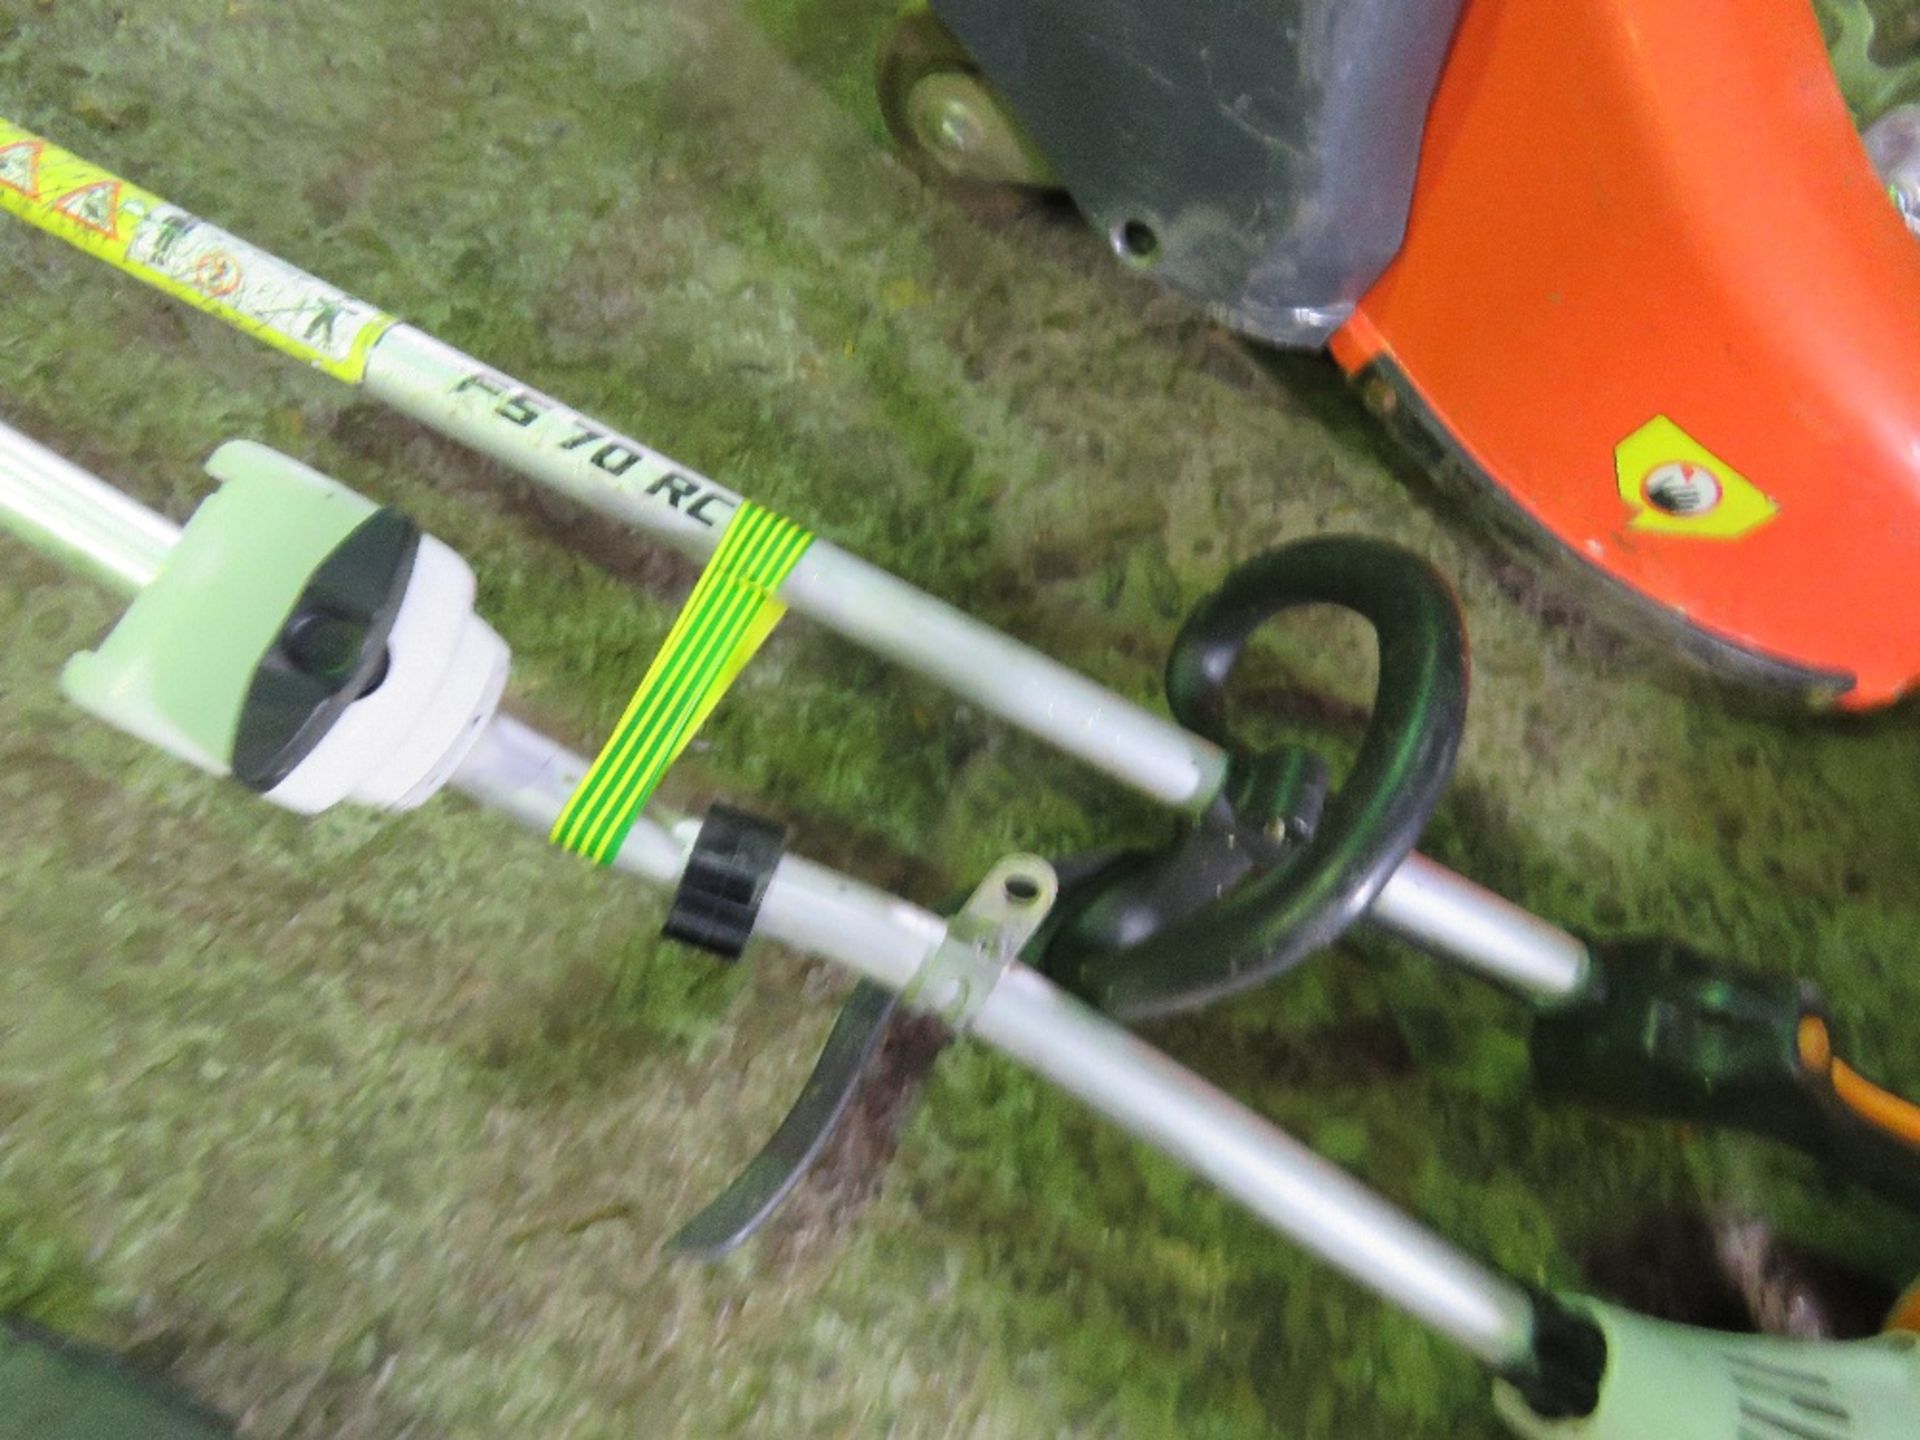 2 X STIHL PETROL ENGINED STRIMMERS: ONE HAS A BENT/DAMAGED SHAFT. THIS LOT IS SOLD UNDER THE AUCTION - Image 3 of 4